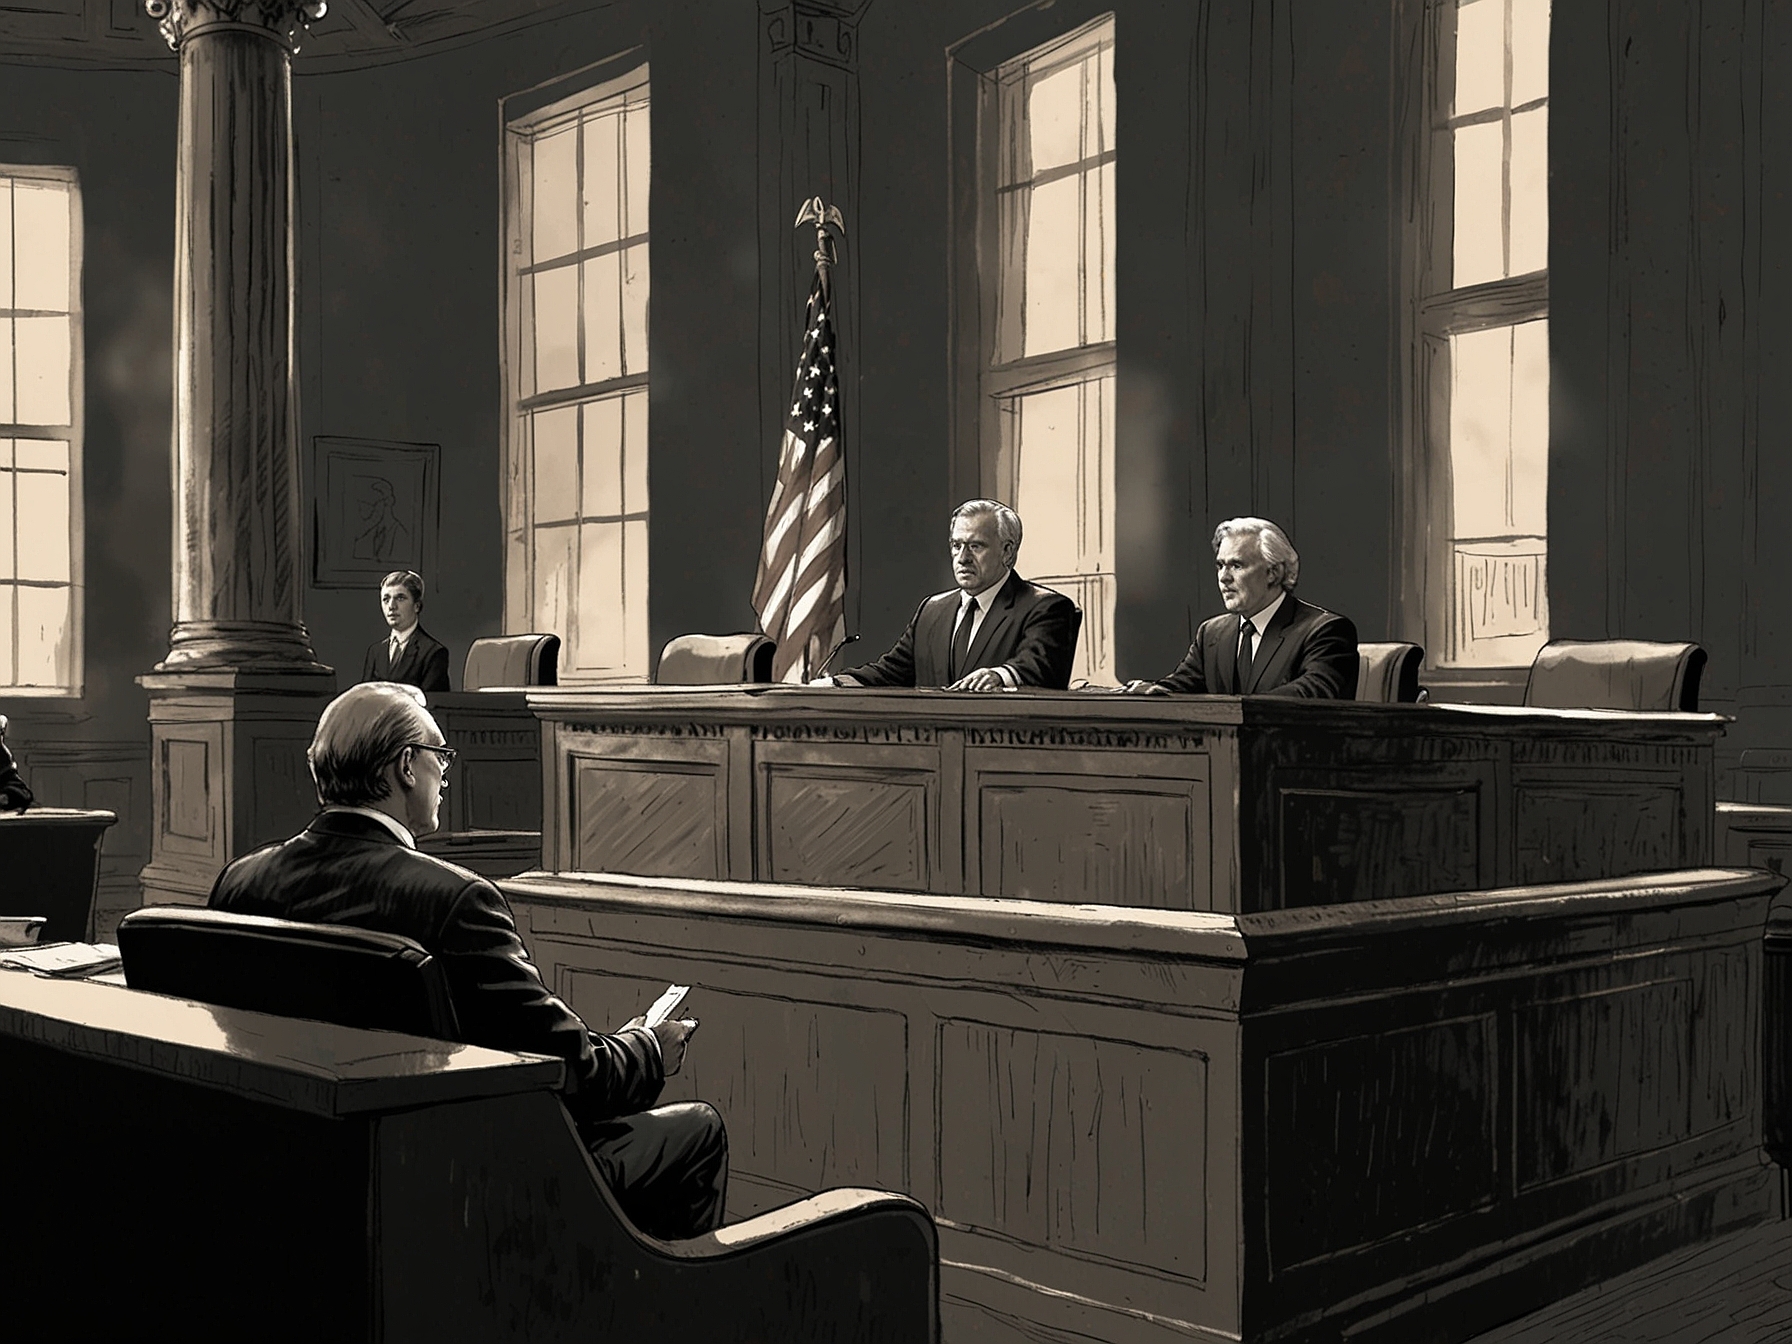 A courtroom scene with a federal judge delivering the ruling against Colorado's interest rate cap, highlighting the legal challenges in regulating interstate lending practices.